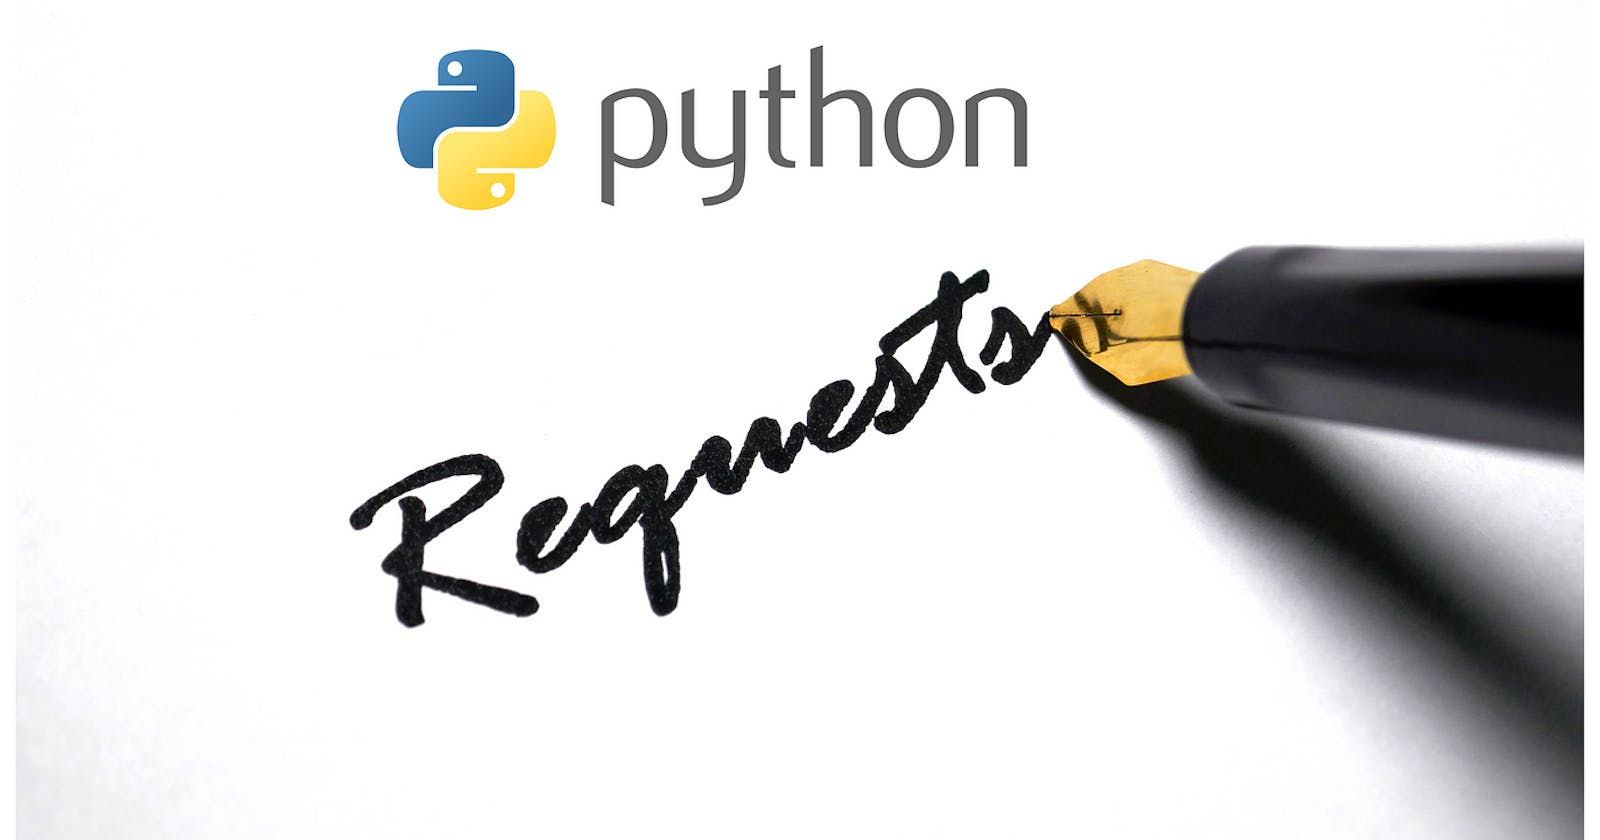 How to send an HTTP request with Python